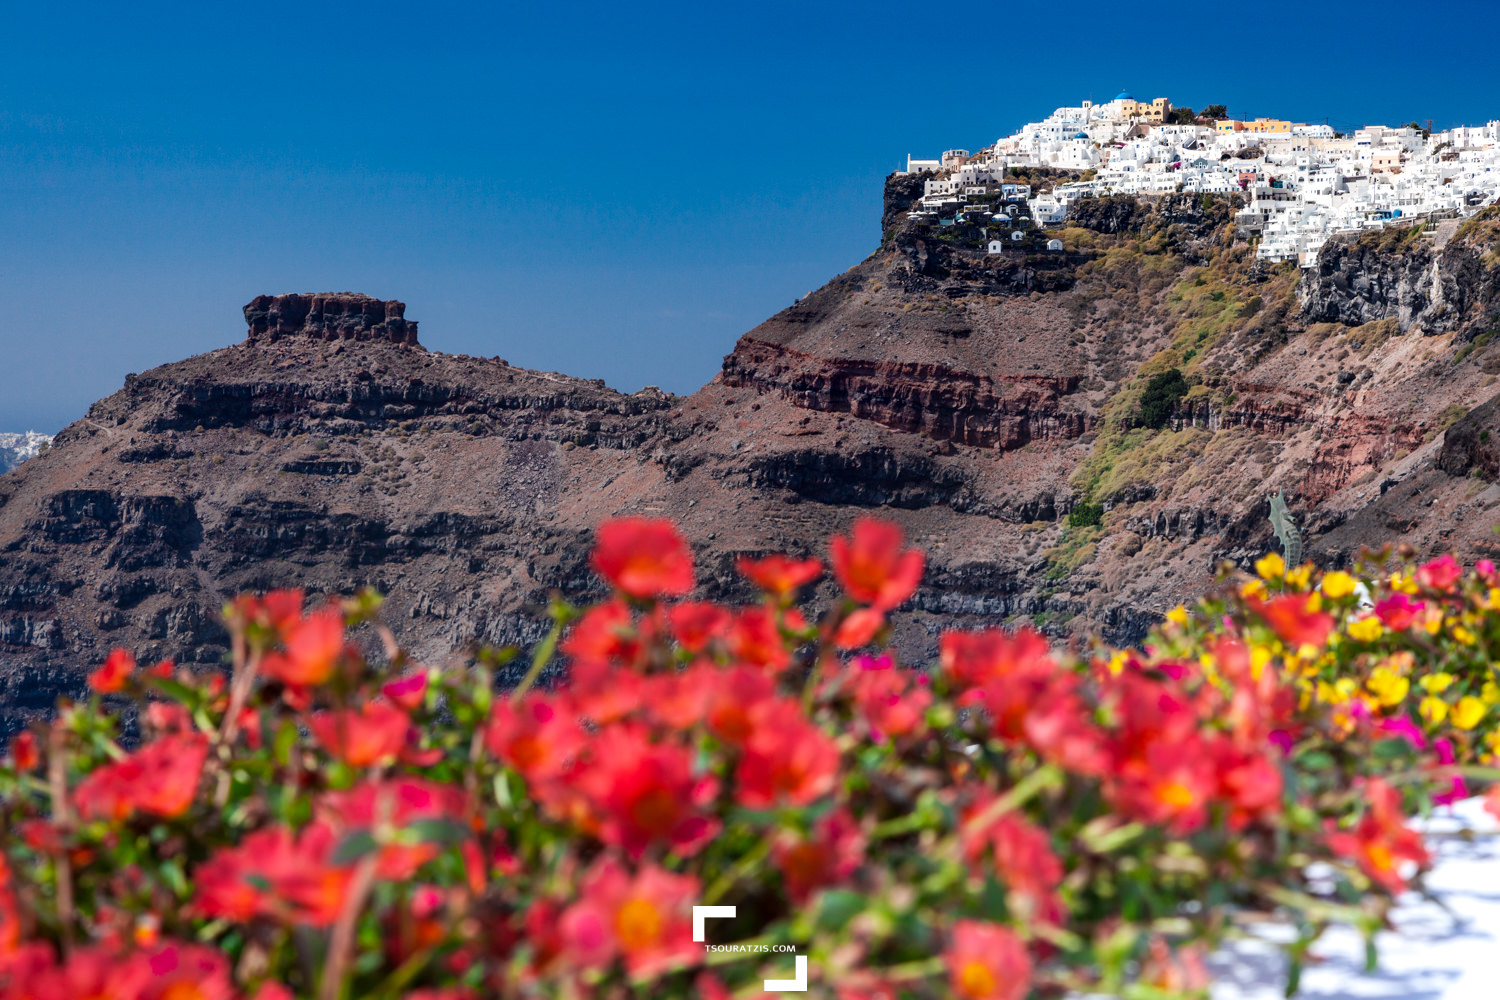 Photos from the majestic island of Santorini